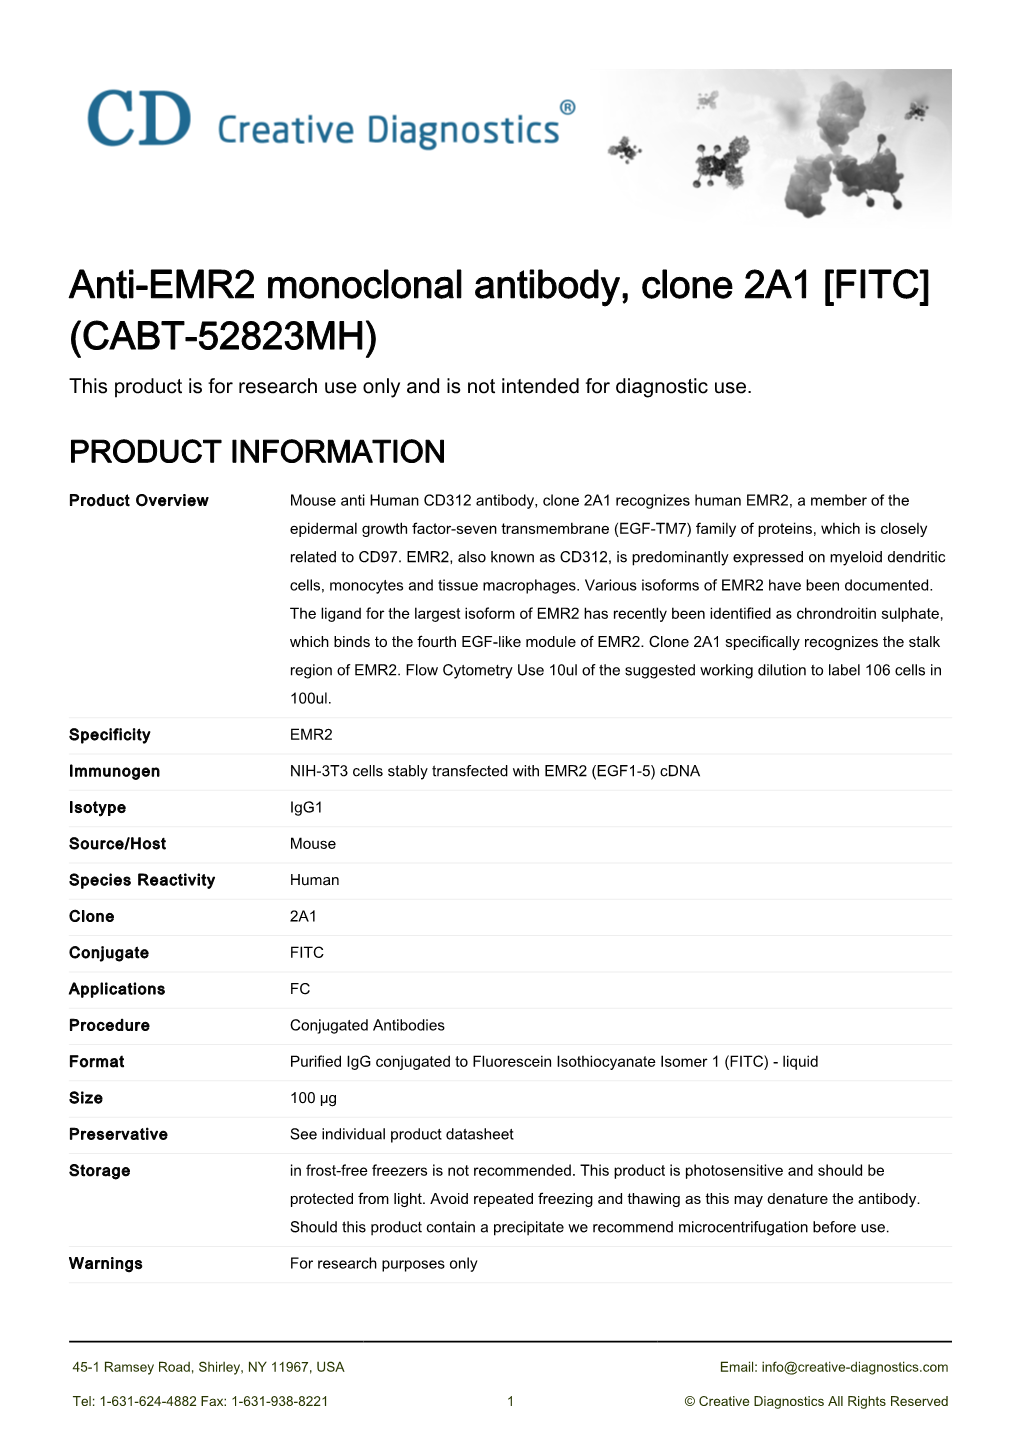 Anti-EMR2 Monoclonal Antibody, Clone 2A1 [FITC] (CABT-52823MH) This Product Is for Research Use Only and Is Not Intended for Diagnostic Use